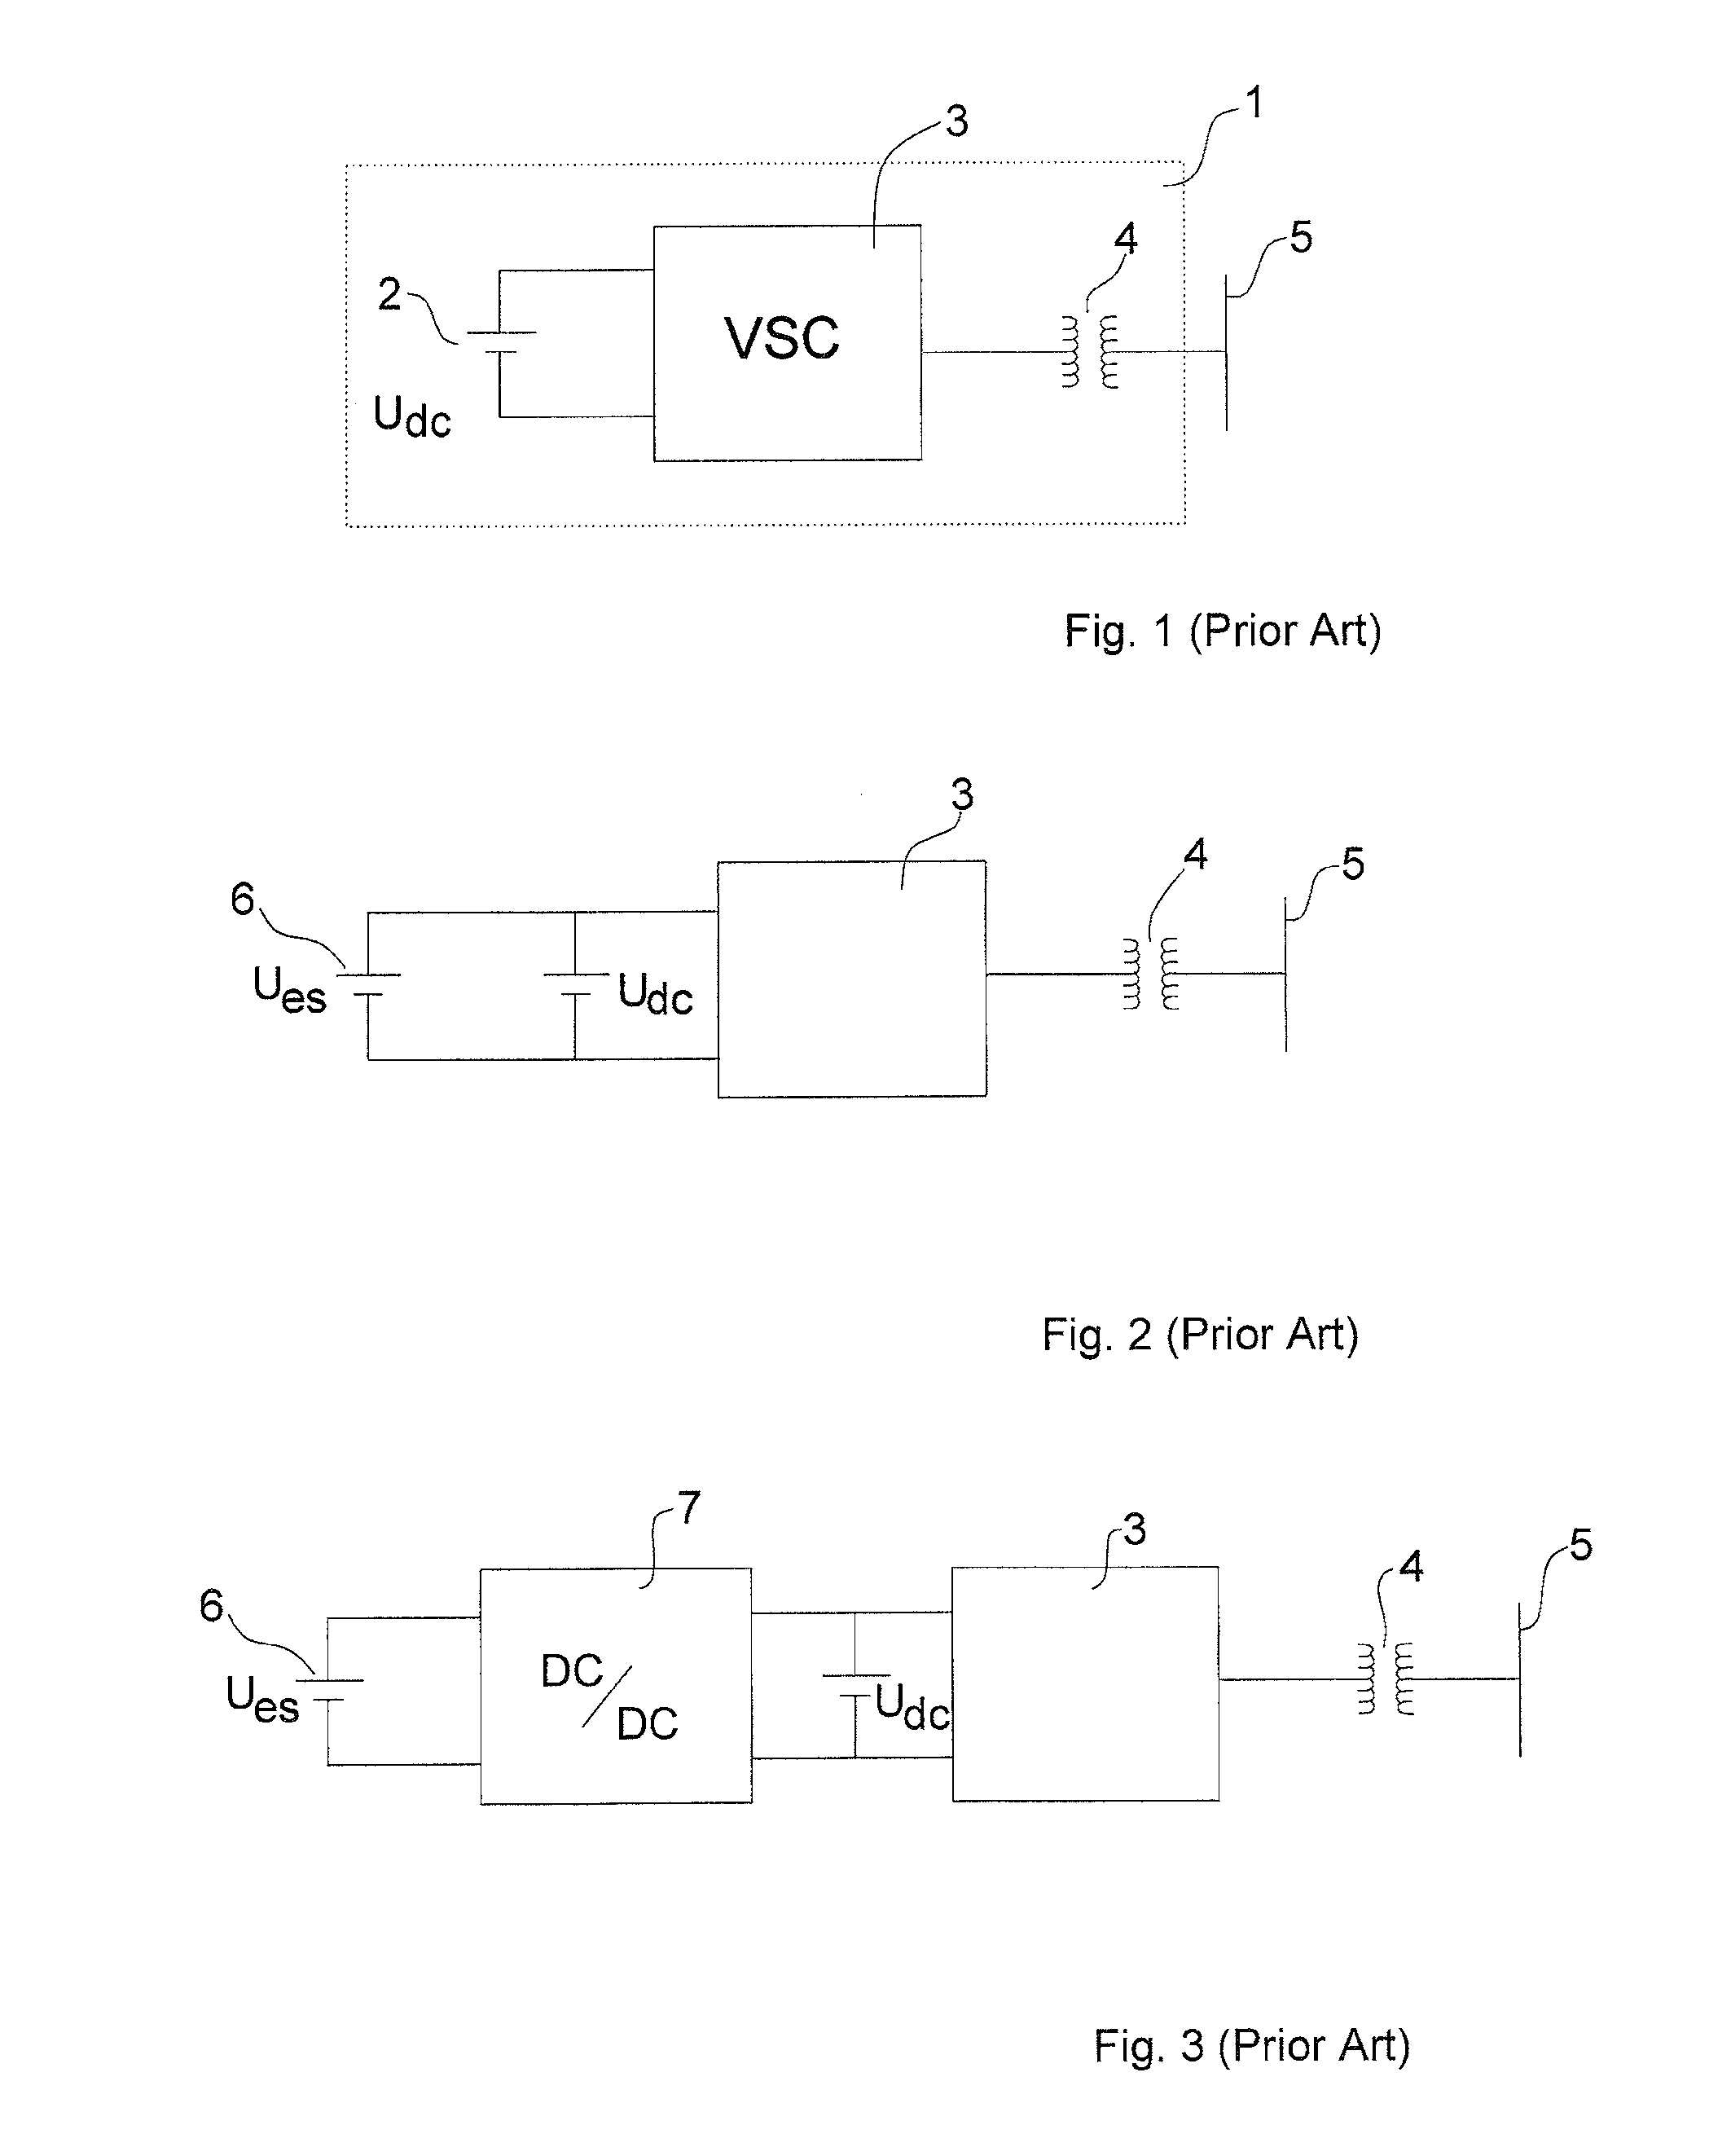 Statcom System For Providing Reactive And/Or Active Power To A Power Network